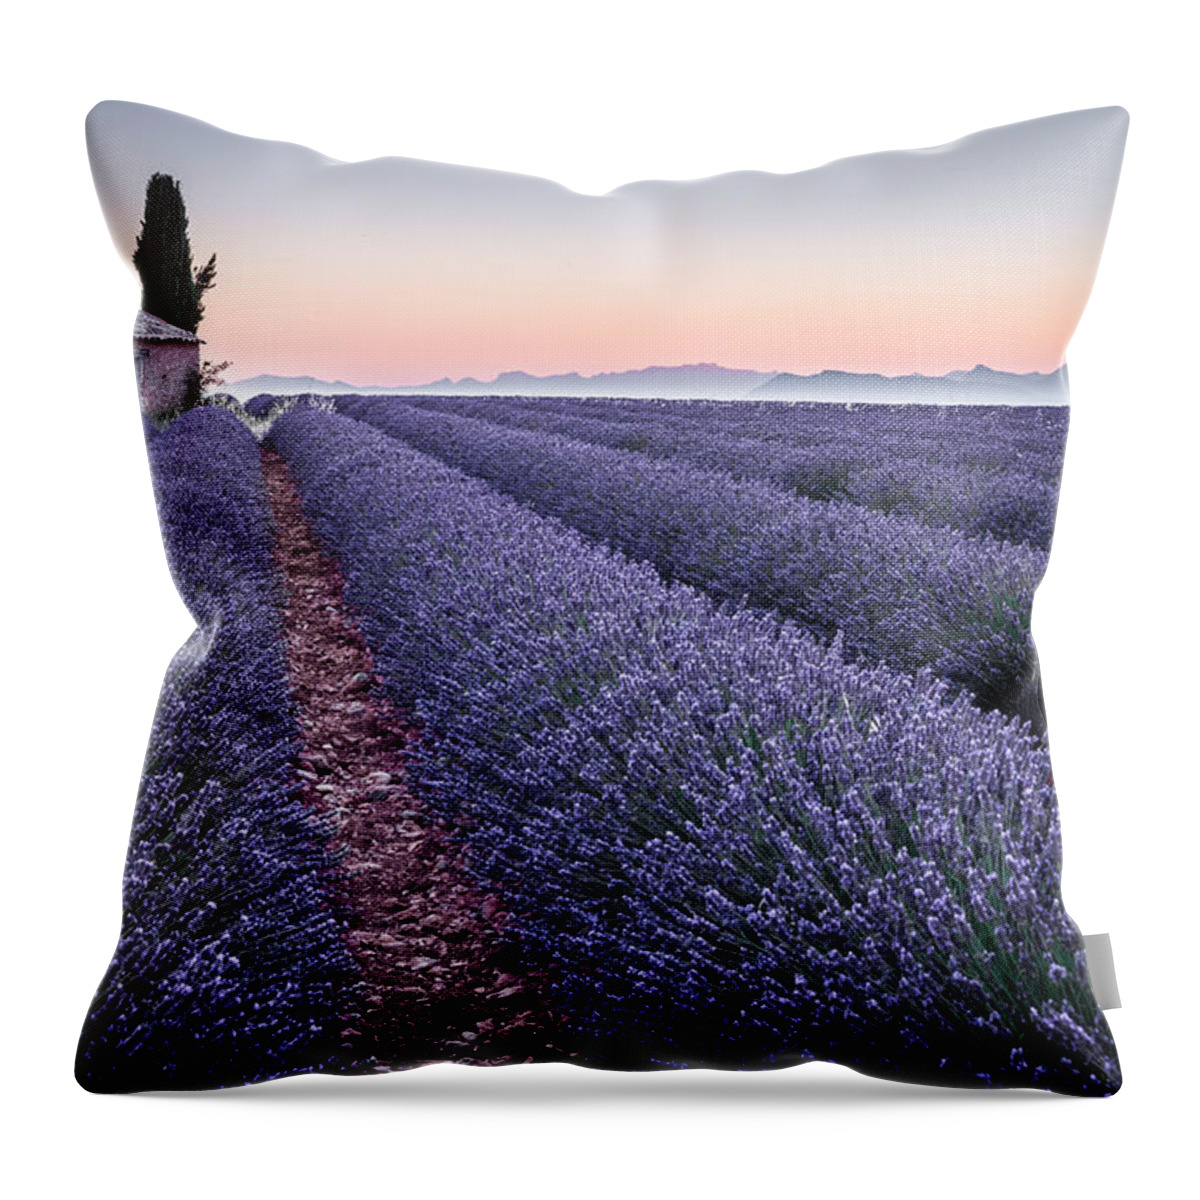 Provence Throw Pillow featuring the photograph Provence by Stefano Termanini